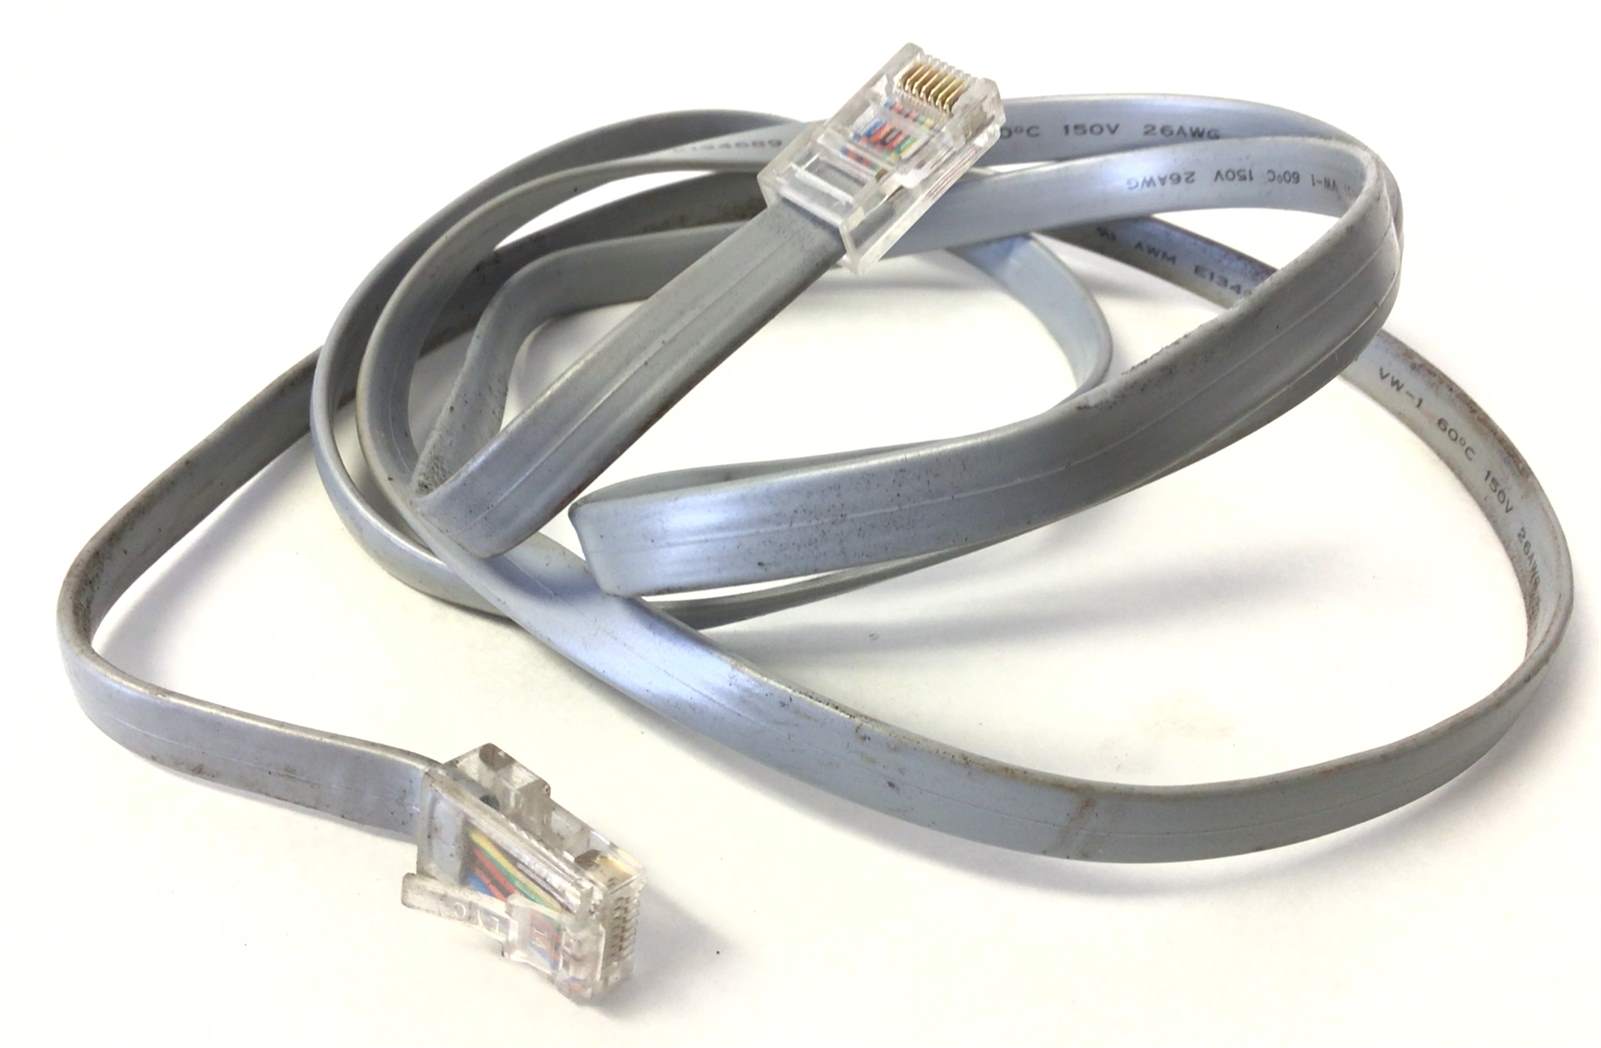 Disp Cable (Used)